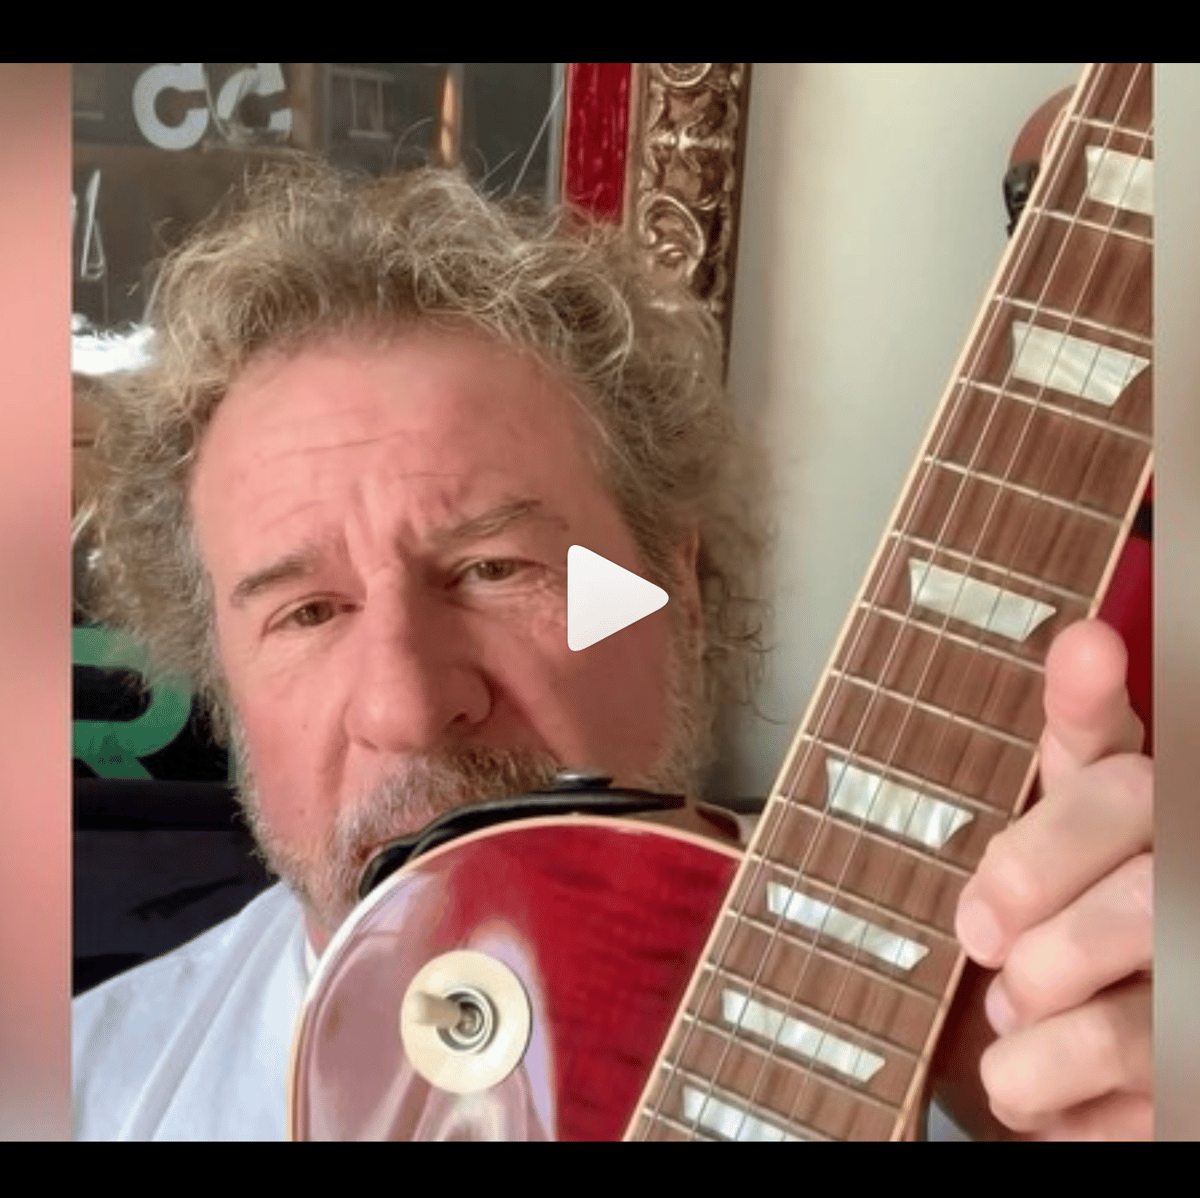 Musical legend, Sammy Hagar, shares his music journey to inspire youth. Through ups and downs, Hagar knew that pushing through any struggles would be rewarded through music. Sharing his message to motivate kids that music can always be the saving grace. Watch the rest of the video on our website. Link in bio.